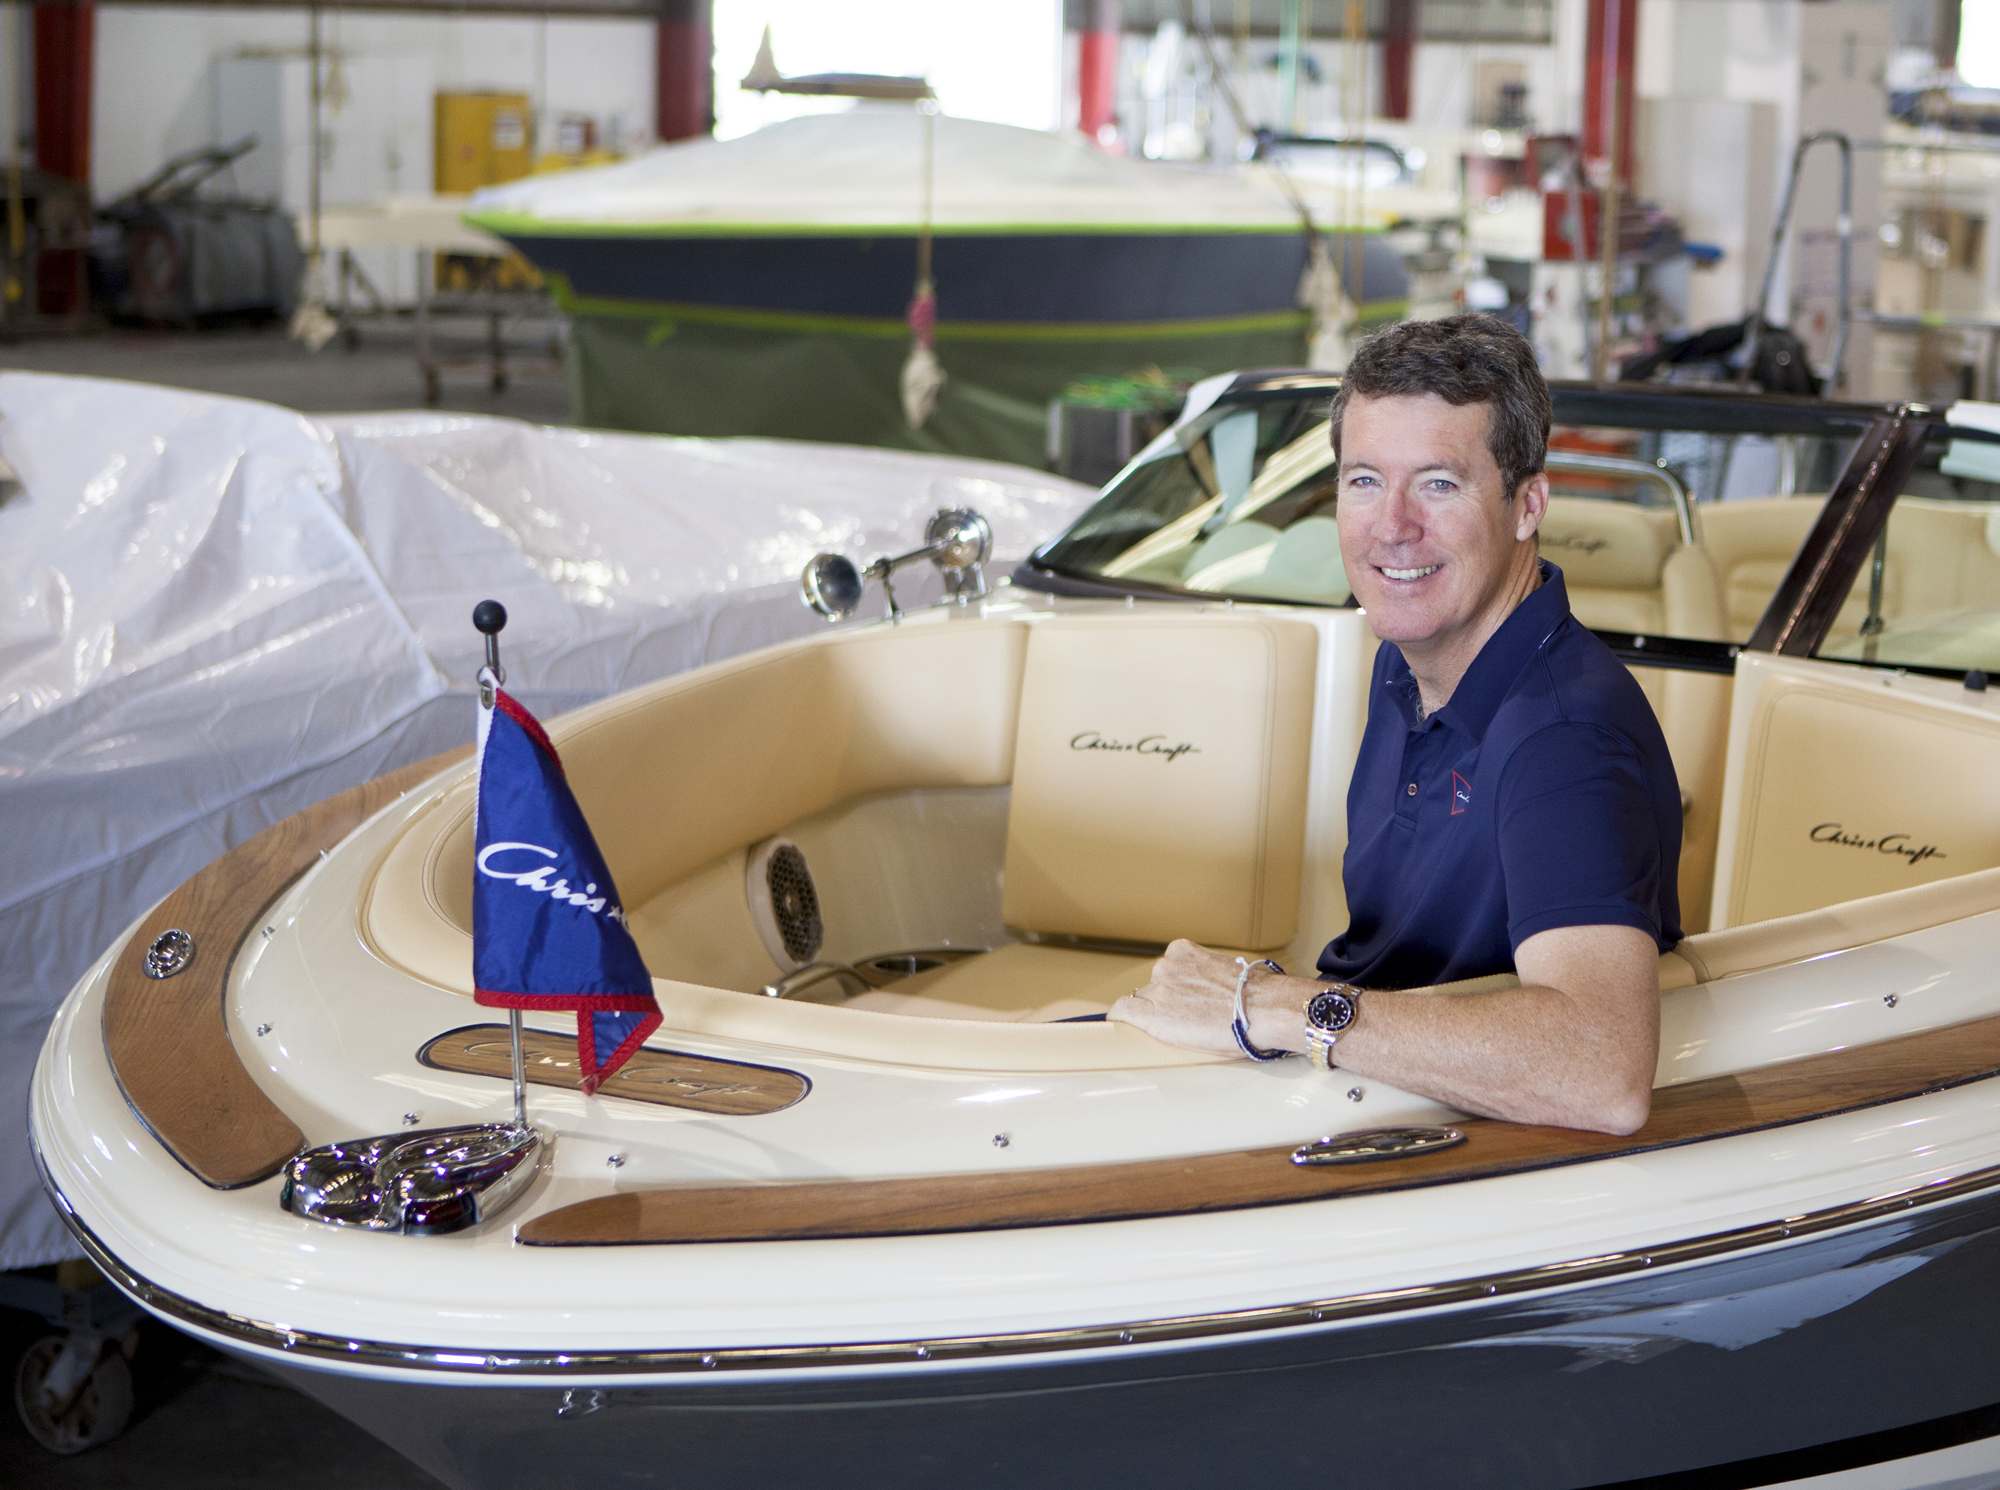 File. Chris-Craft President and CEO Steve Heese stuck with the venerable boat brand through thick and thin.